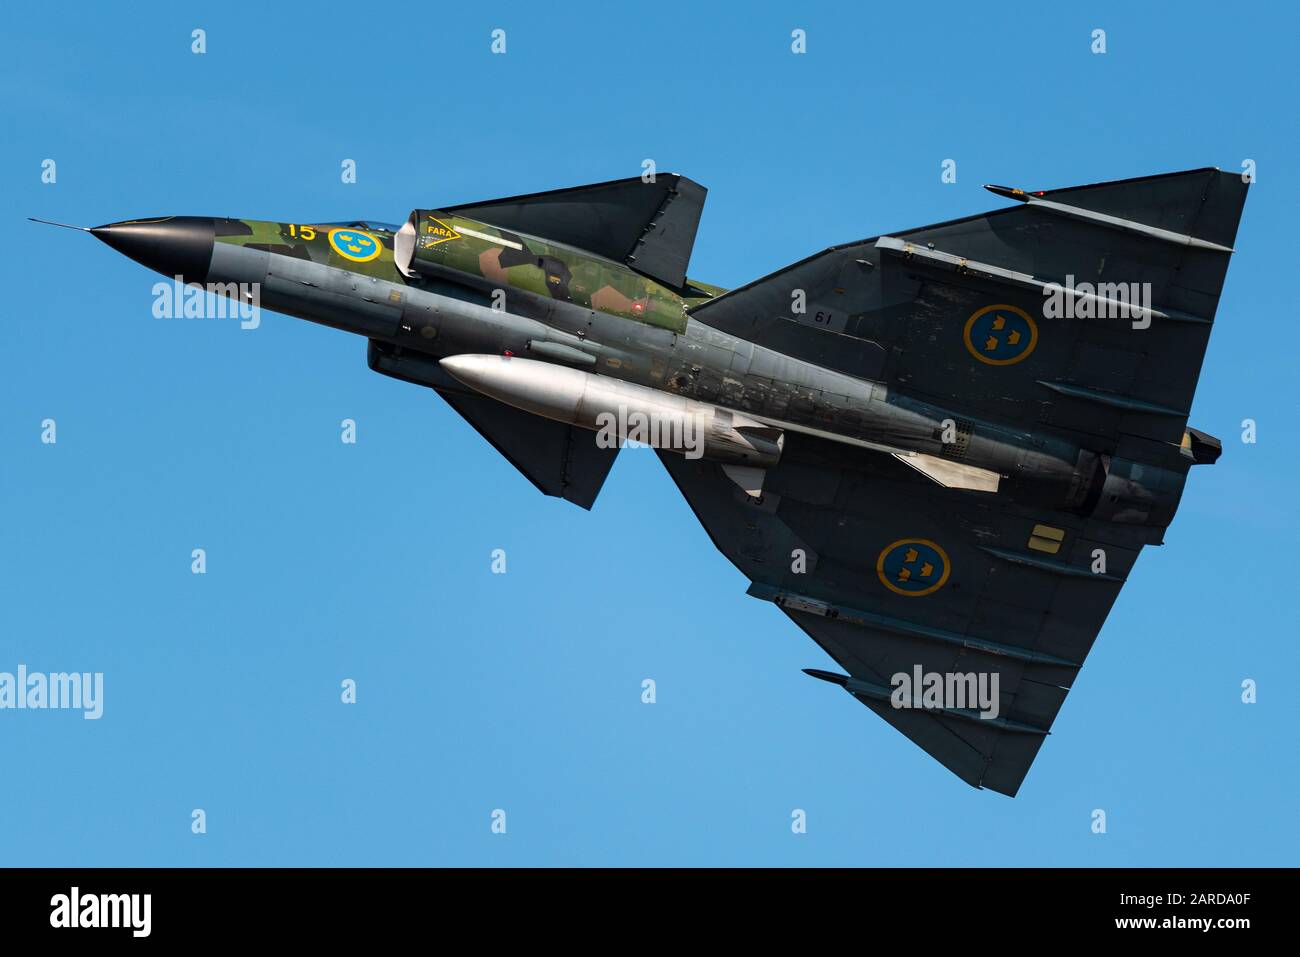 A beautiful Saab 37 Viggen fighter jet of the Swedish Air Force Historic Flight. Stock Photo